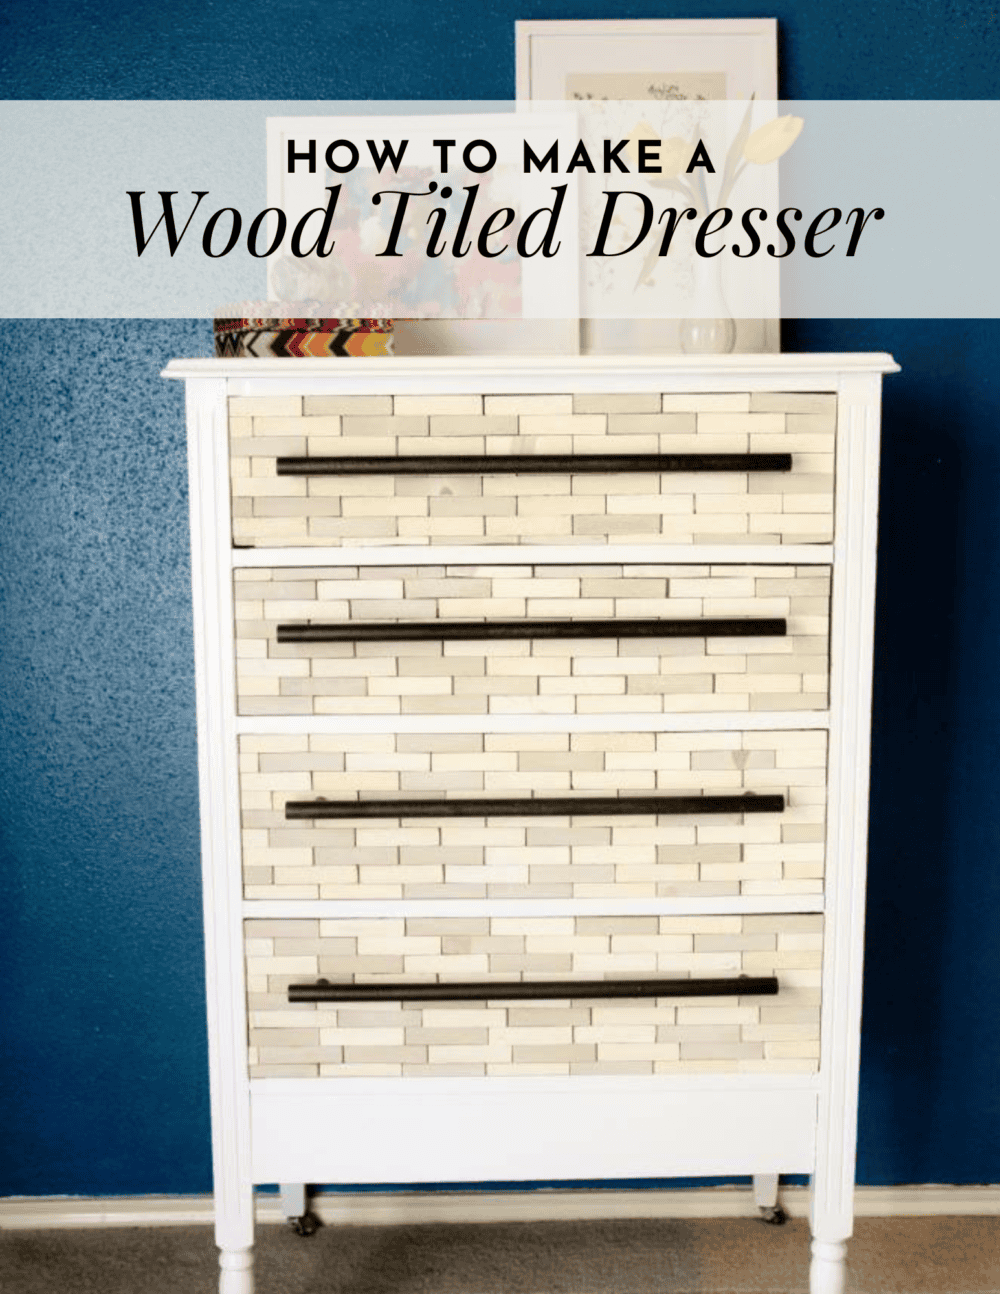 a wood tiled dresser with text overlay that says "how to make a wood tiled dresser"